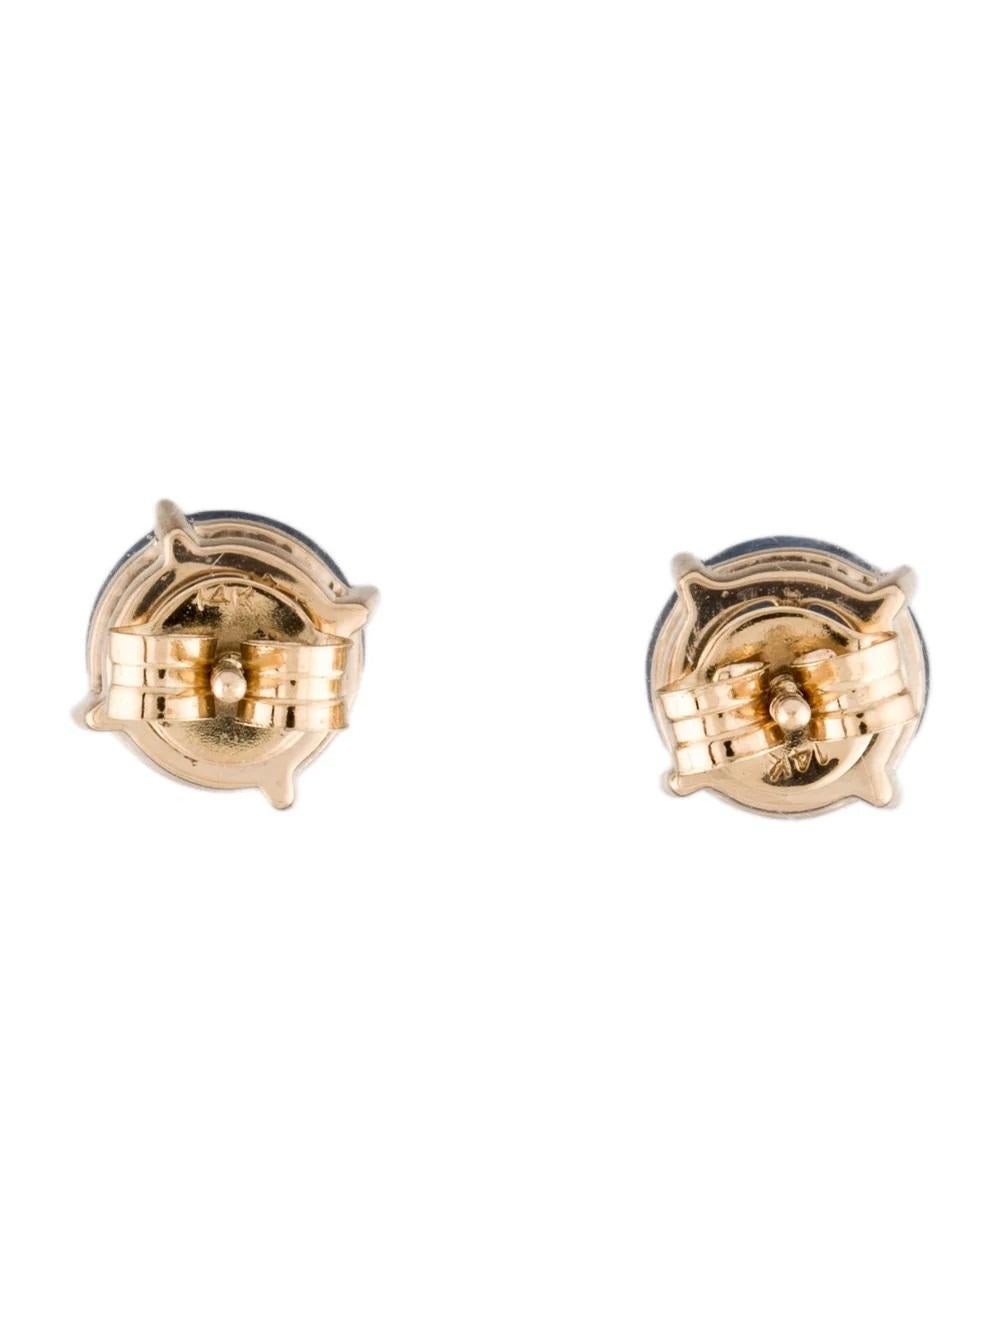 Round Cut 14K Sapphire Stud Earrings 3.69ctw: Timeless Elegance in Yellow Gold - Luxury For Sale